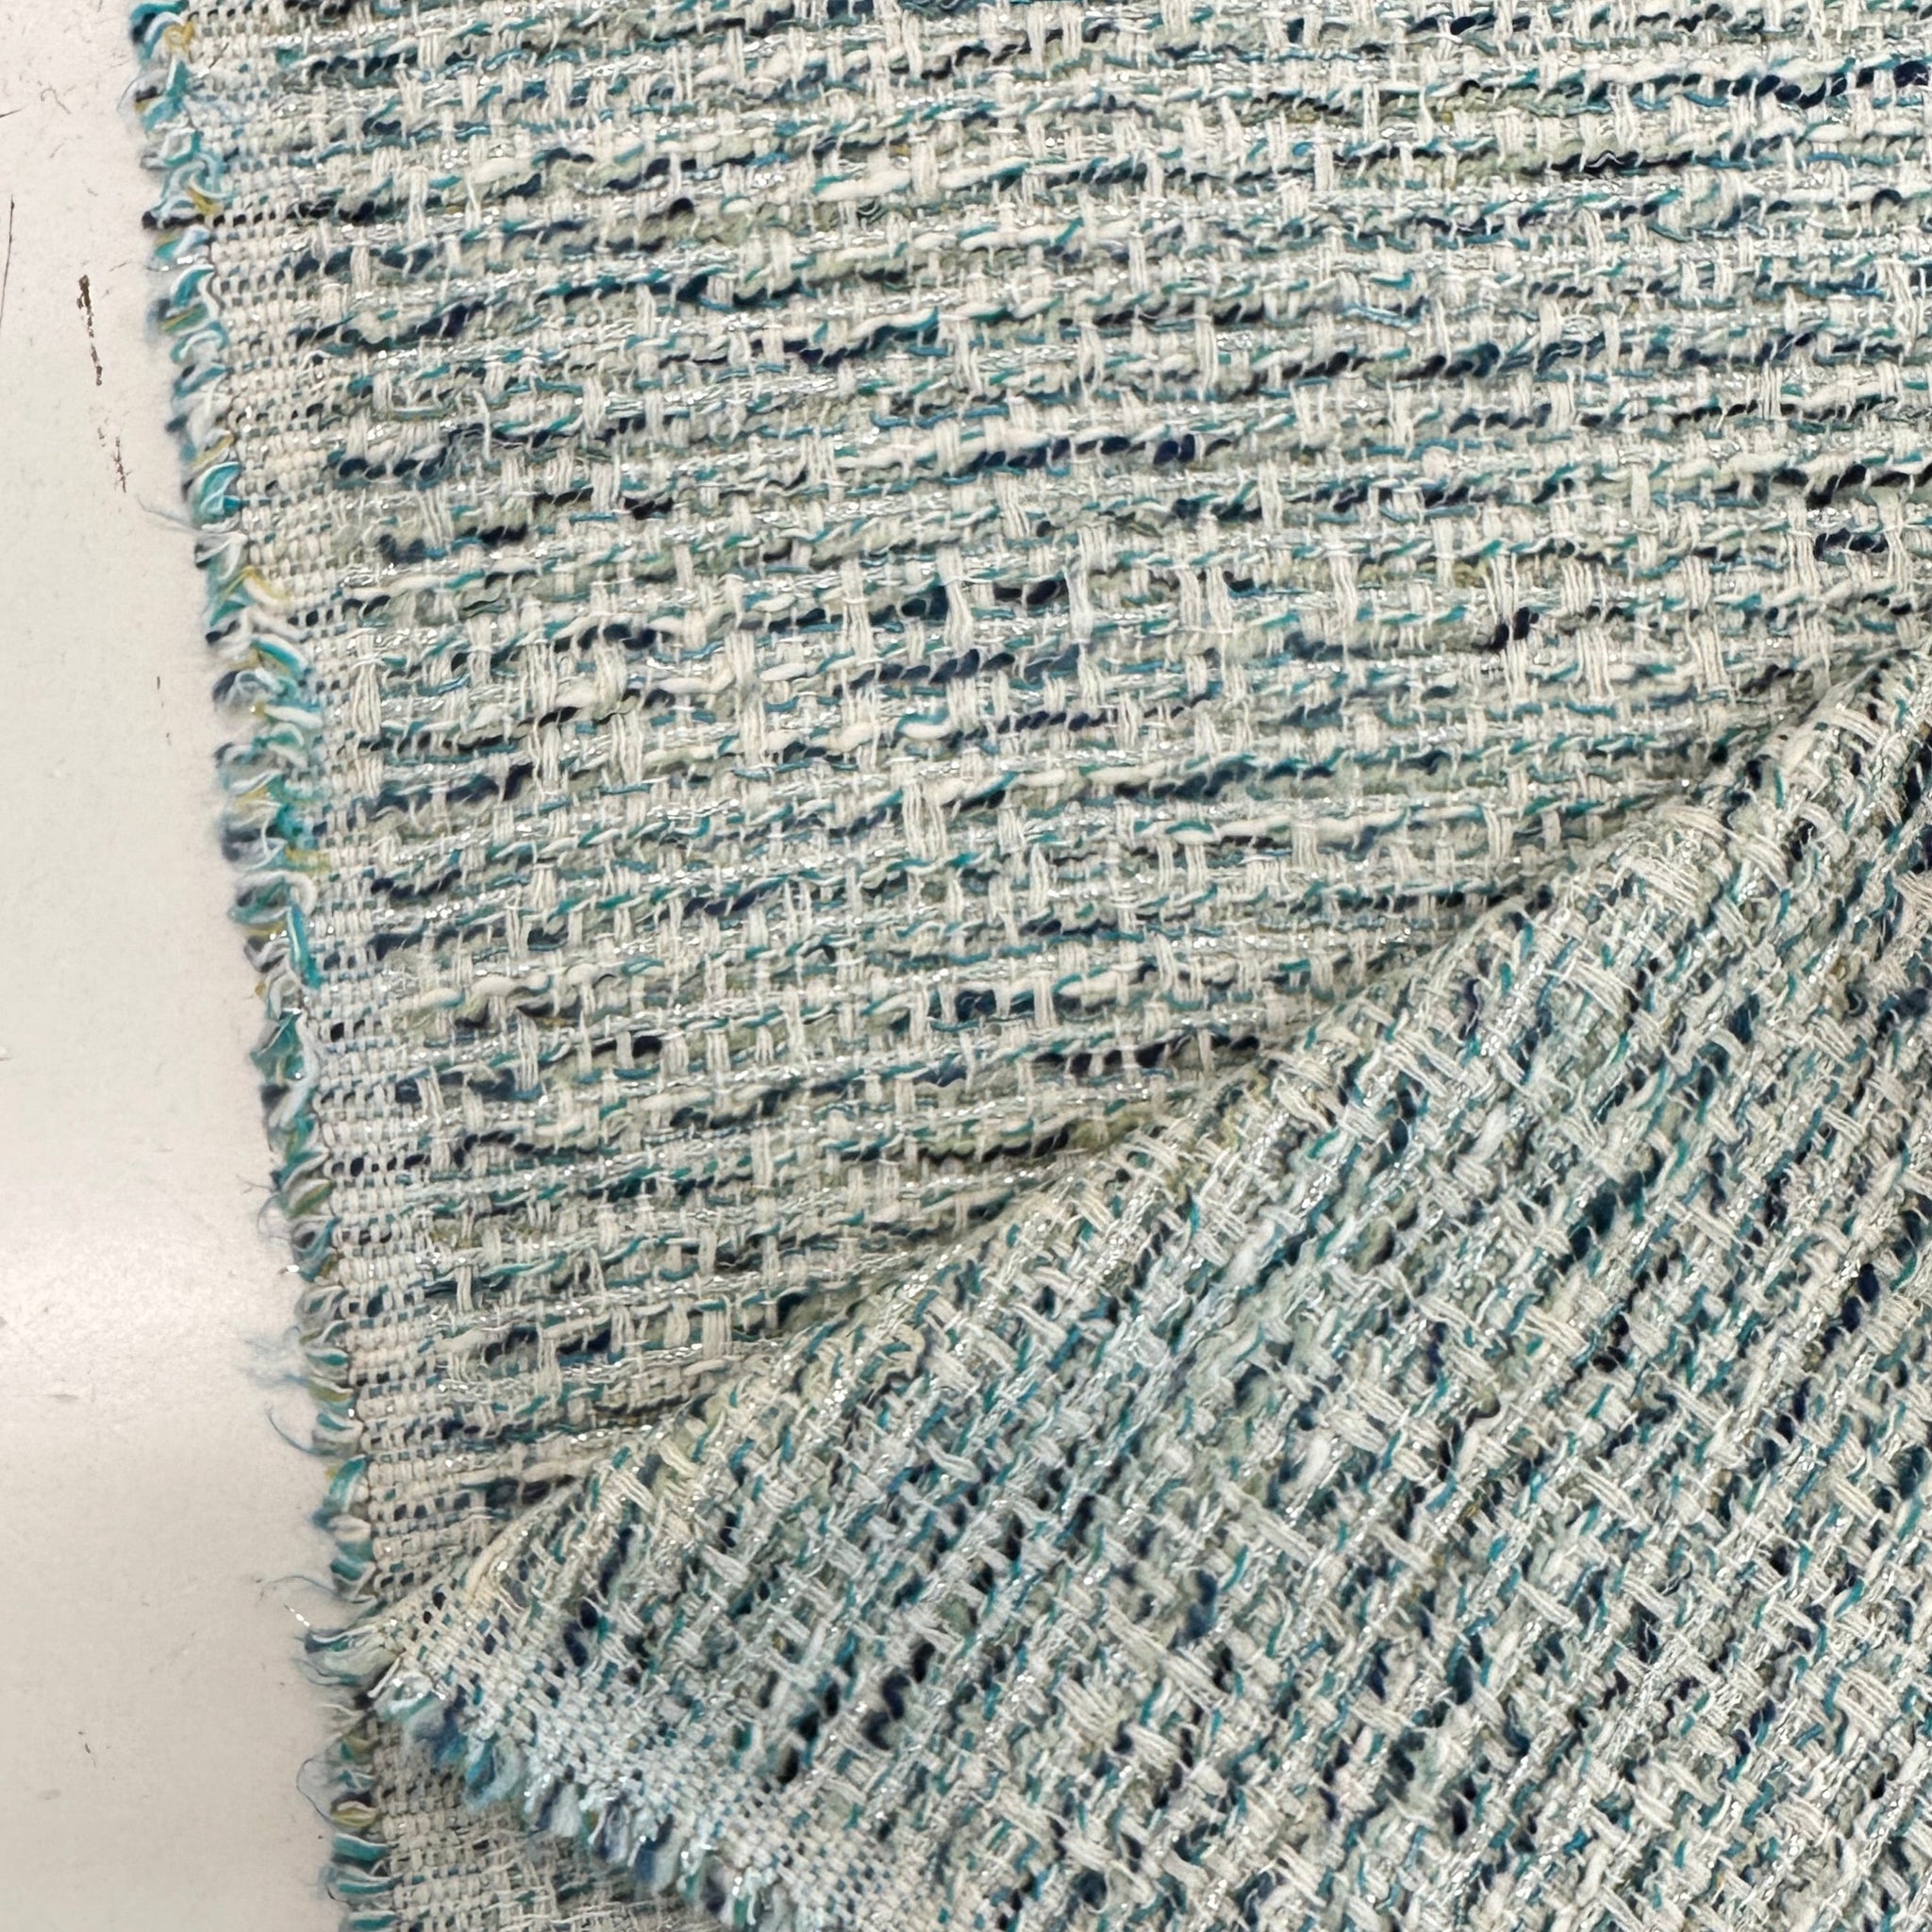 Boucle Tweed Fabric Italy ex designer Chanel style White With Hints Of Turquoise And Dark Blue Made In Italy